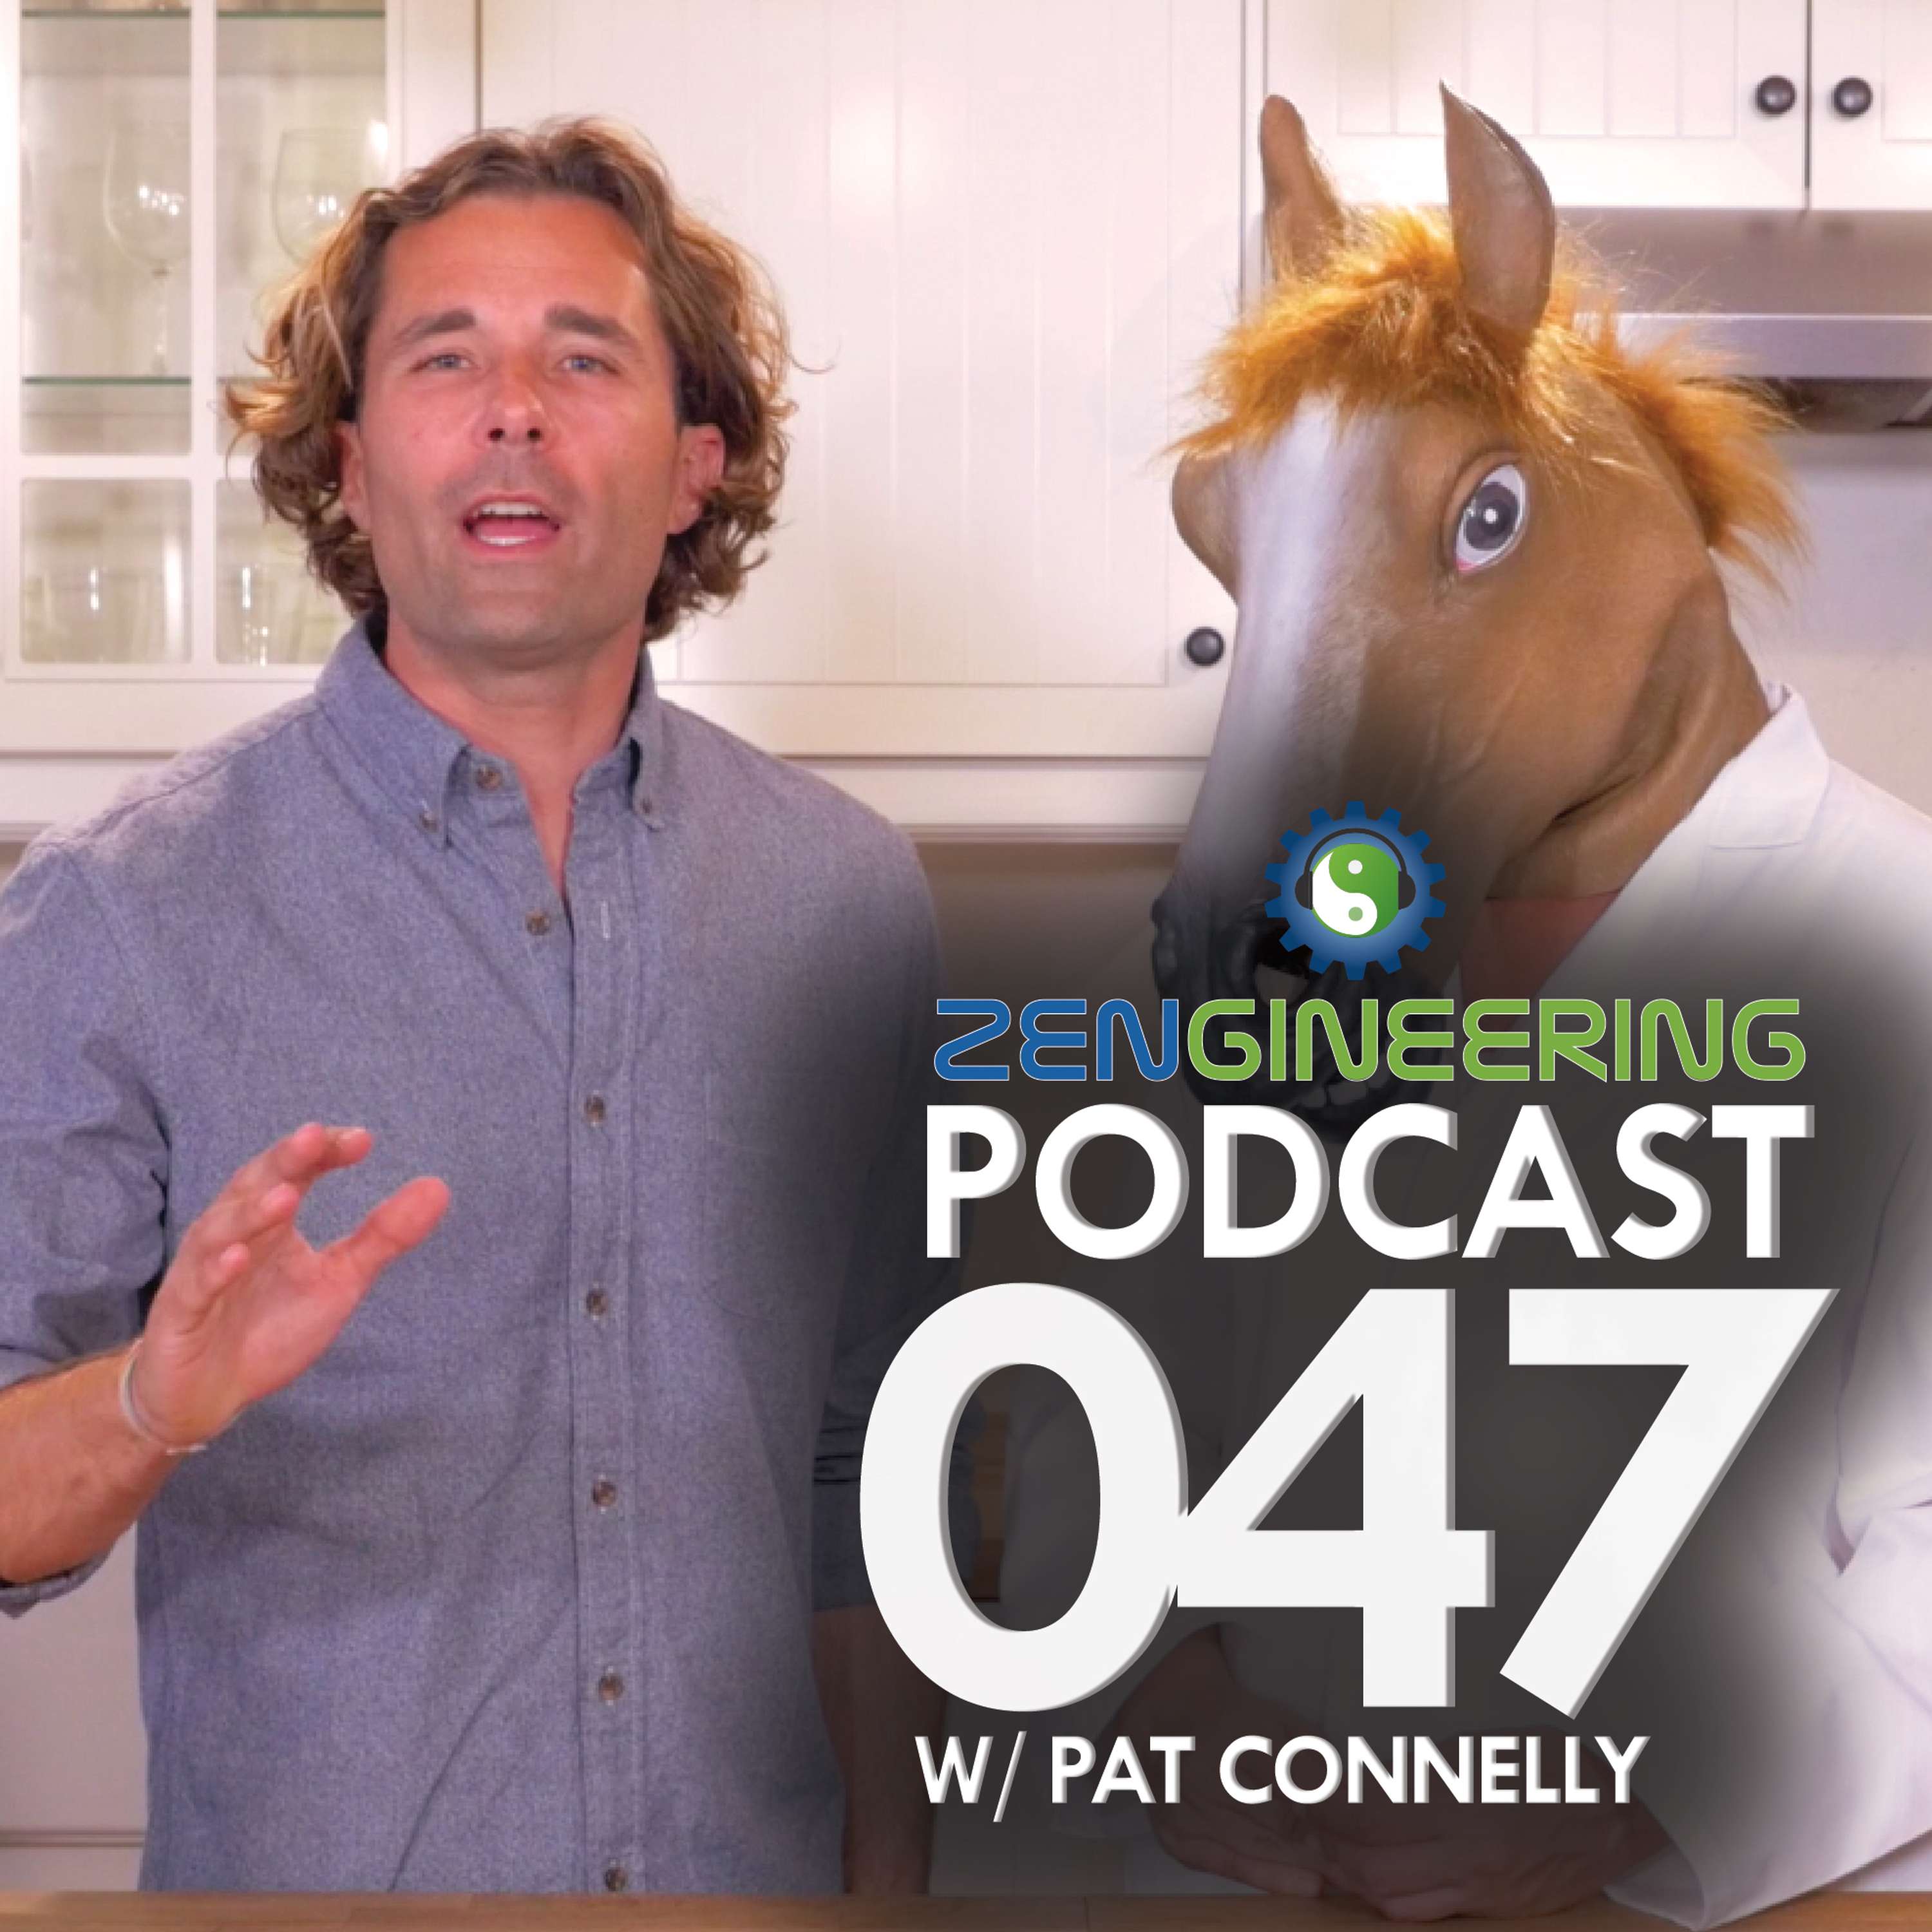 047 - with Pat Connelly - On Health, Happiness, and The Rock